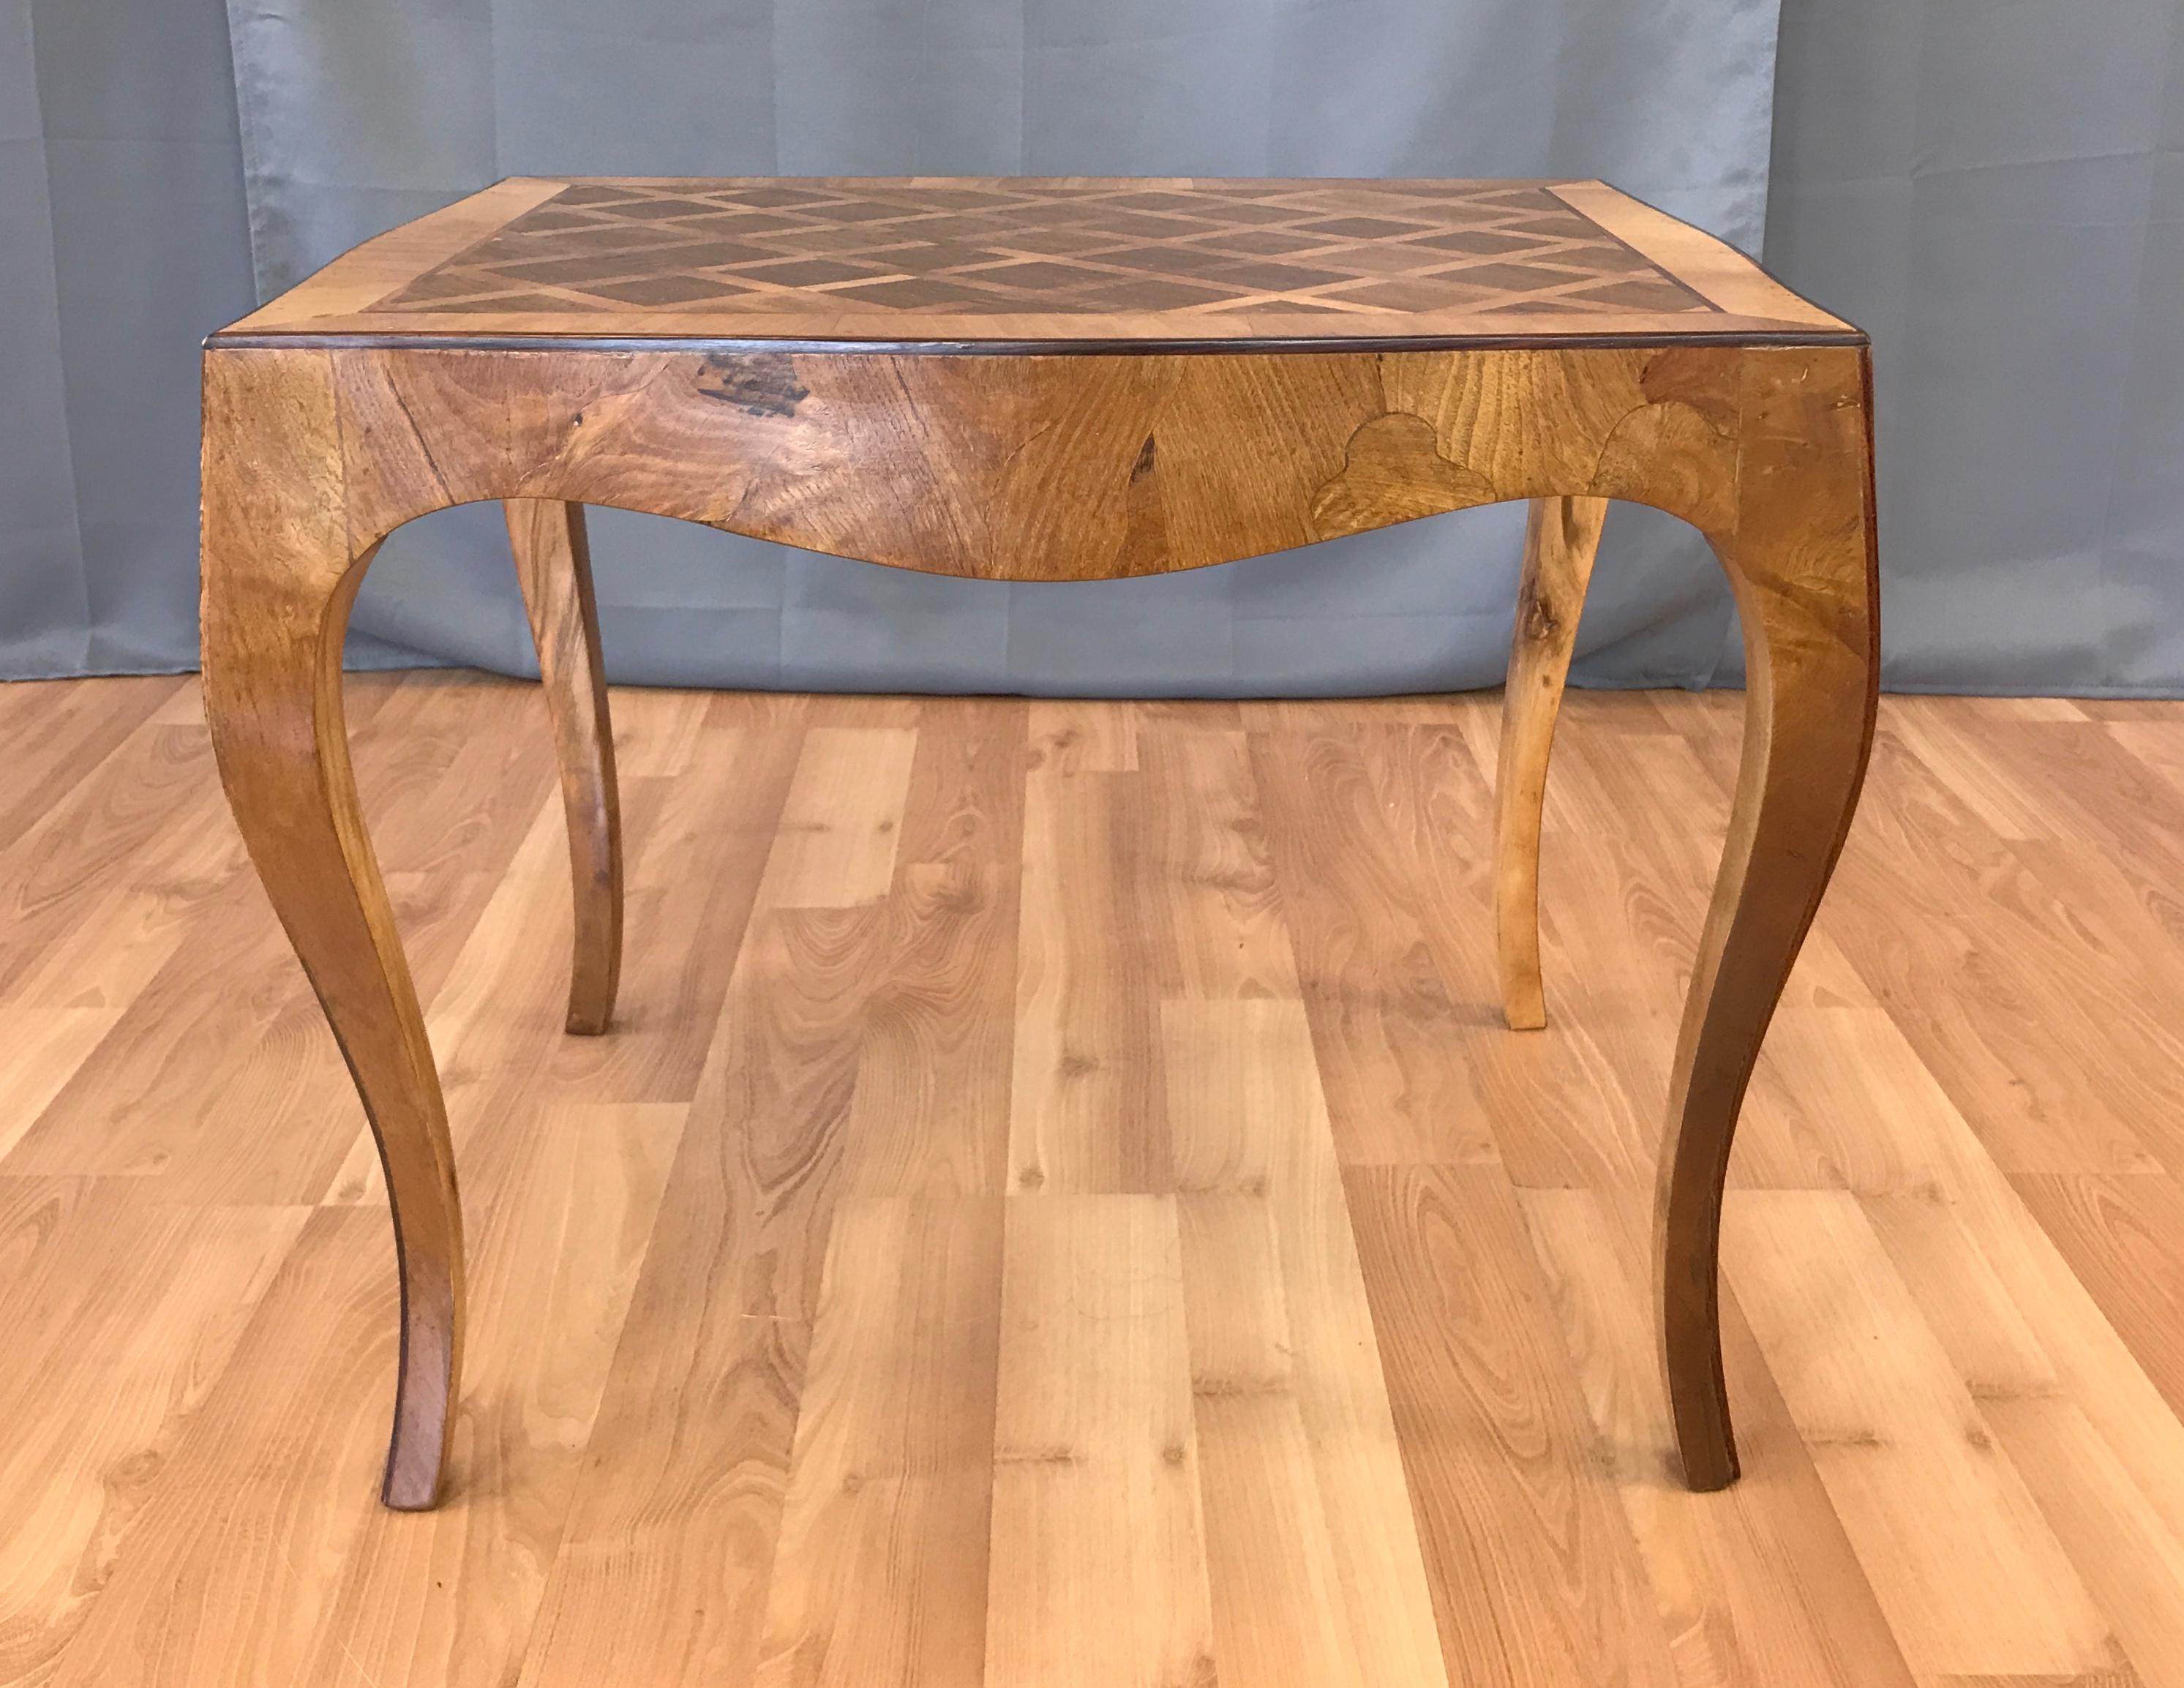 Offered here is a vintage 1940s Italian marquetry end table.

This example features intricately grained dark walnut bordered with a light colored satin wood boarder with a diagonal pattern. The apron and delicate cabriole legs are a blonde maple